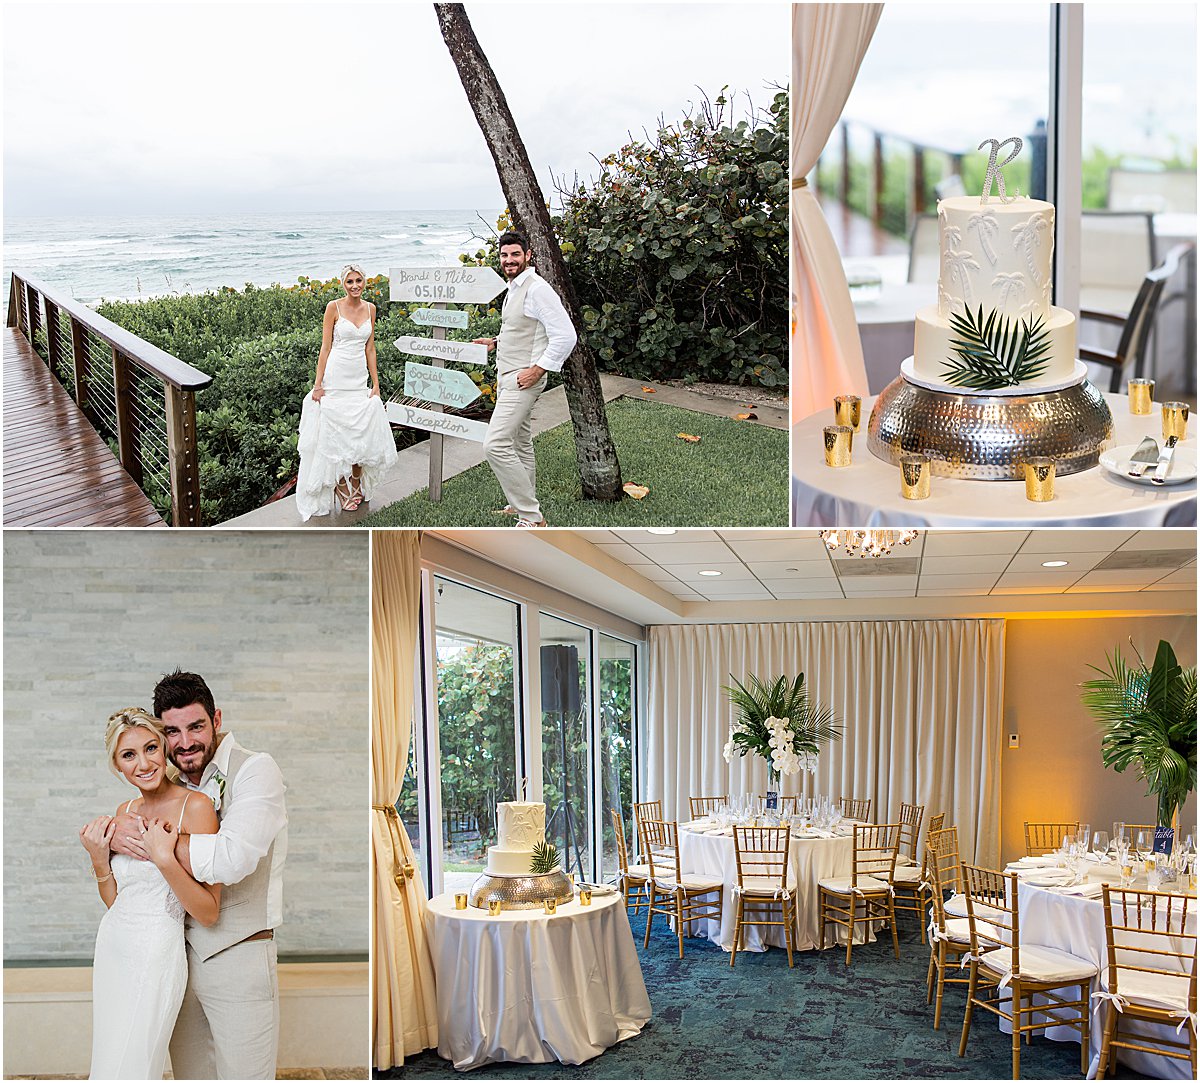 Elegant Oceanfront Wedding at Delray Sands Resort | Married in Palm Beach | www.marriedinpalmbeach.com | Blink & Co Photography